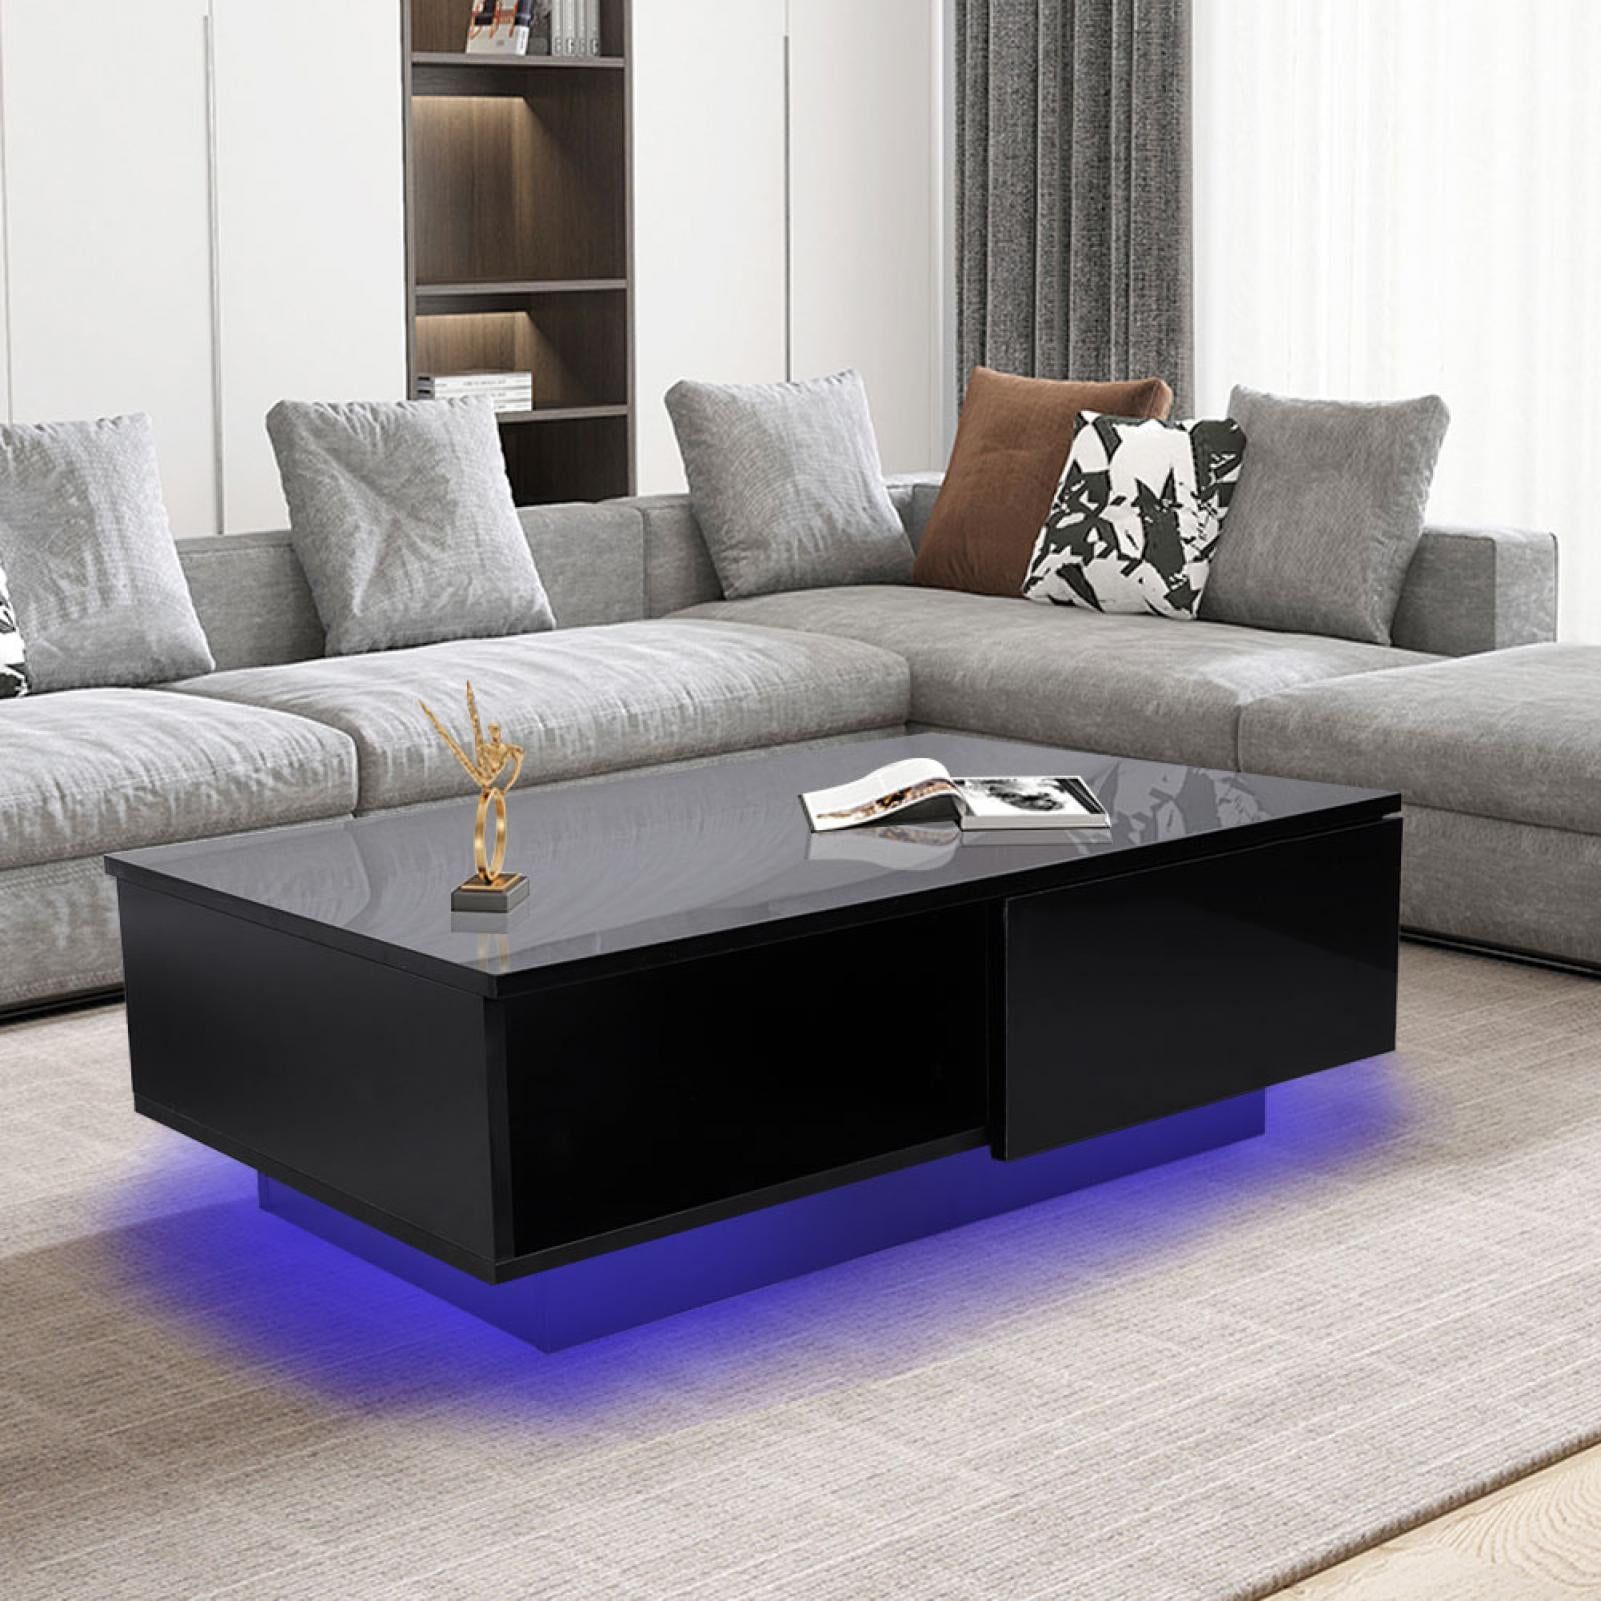 Ebtools Rectangle Led Coffee Table, Black Modern High Gloss Furniture Inside Rectangular Led Coffee Tables (View 5 of 20)